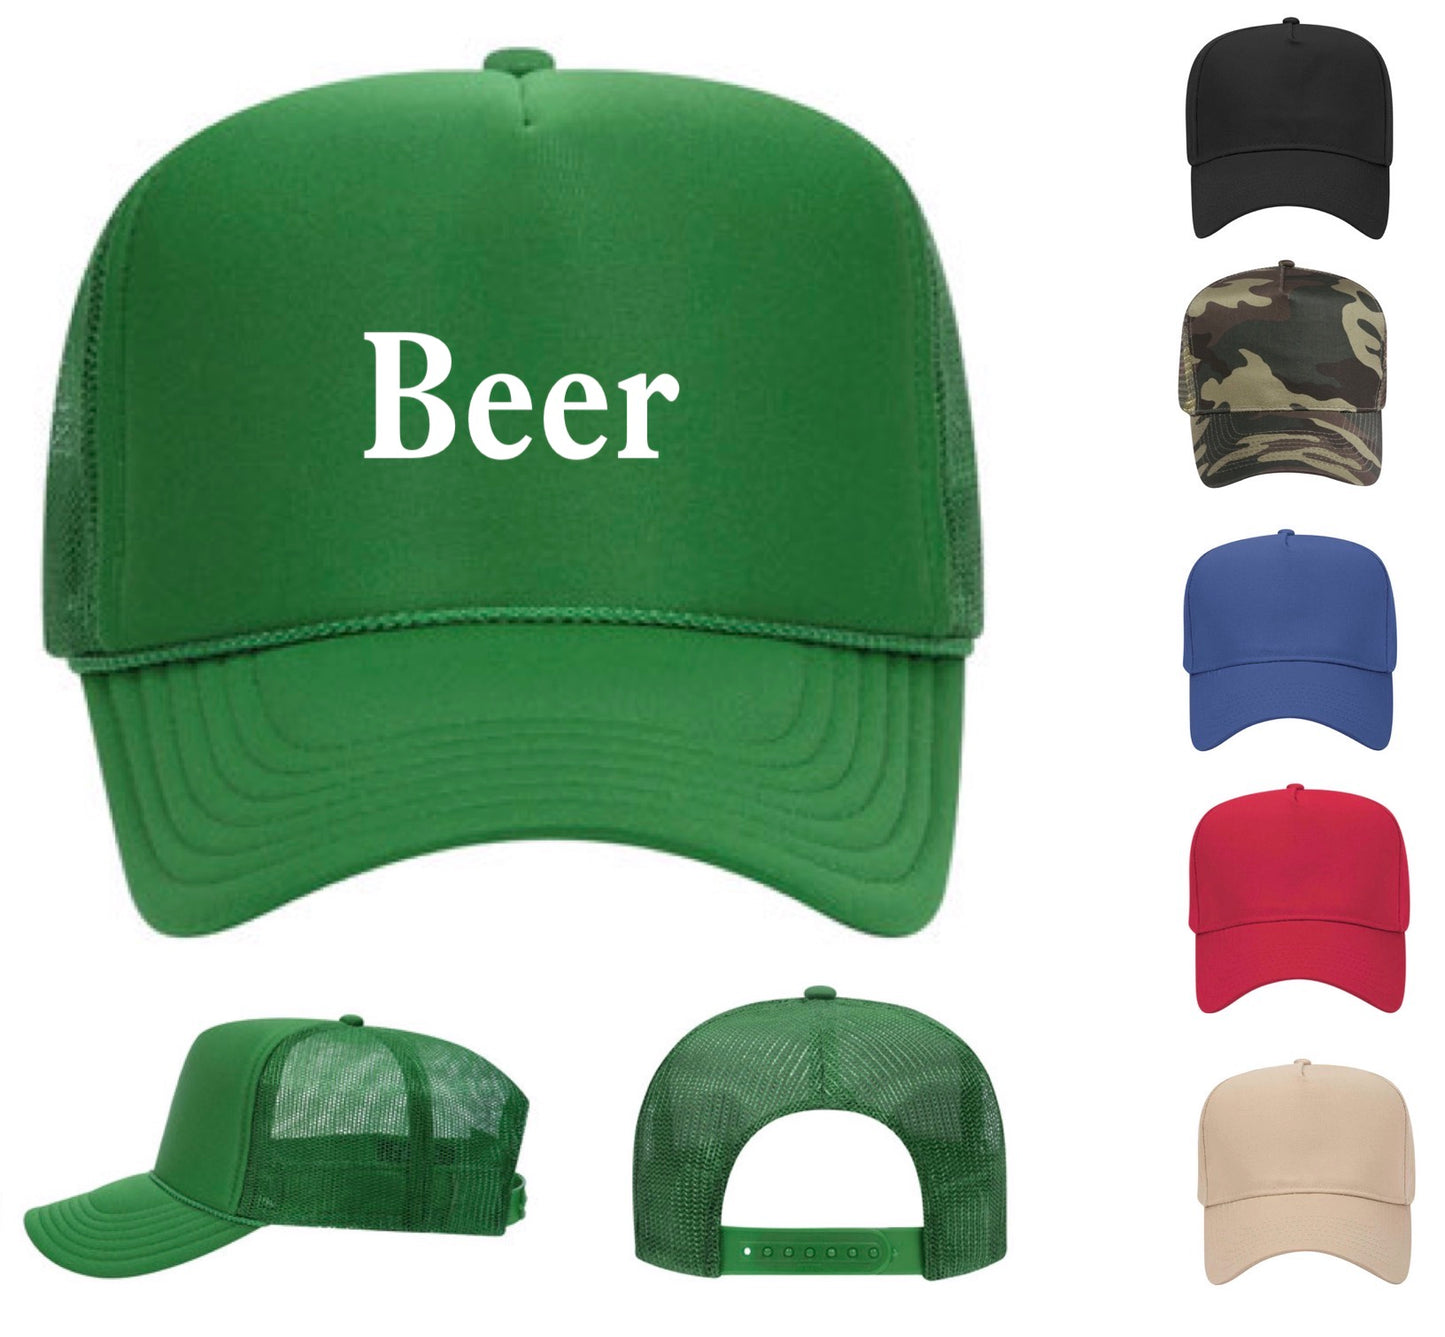 Beer Hat (FREE Shipping)